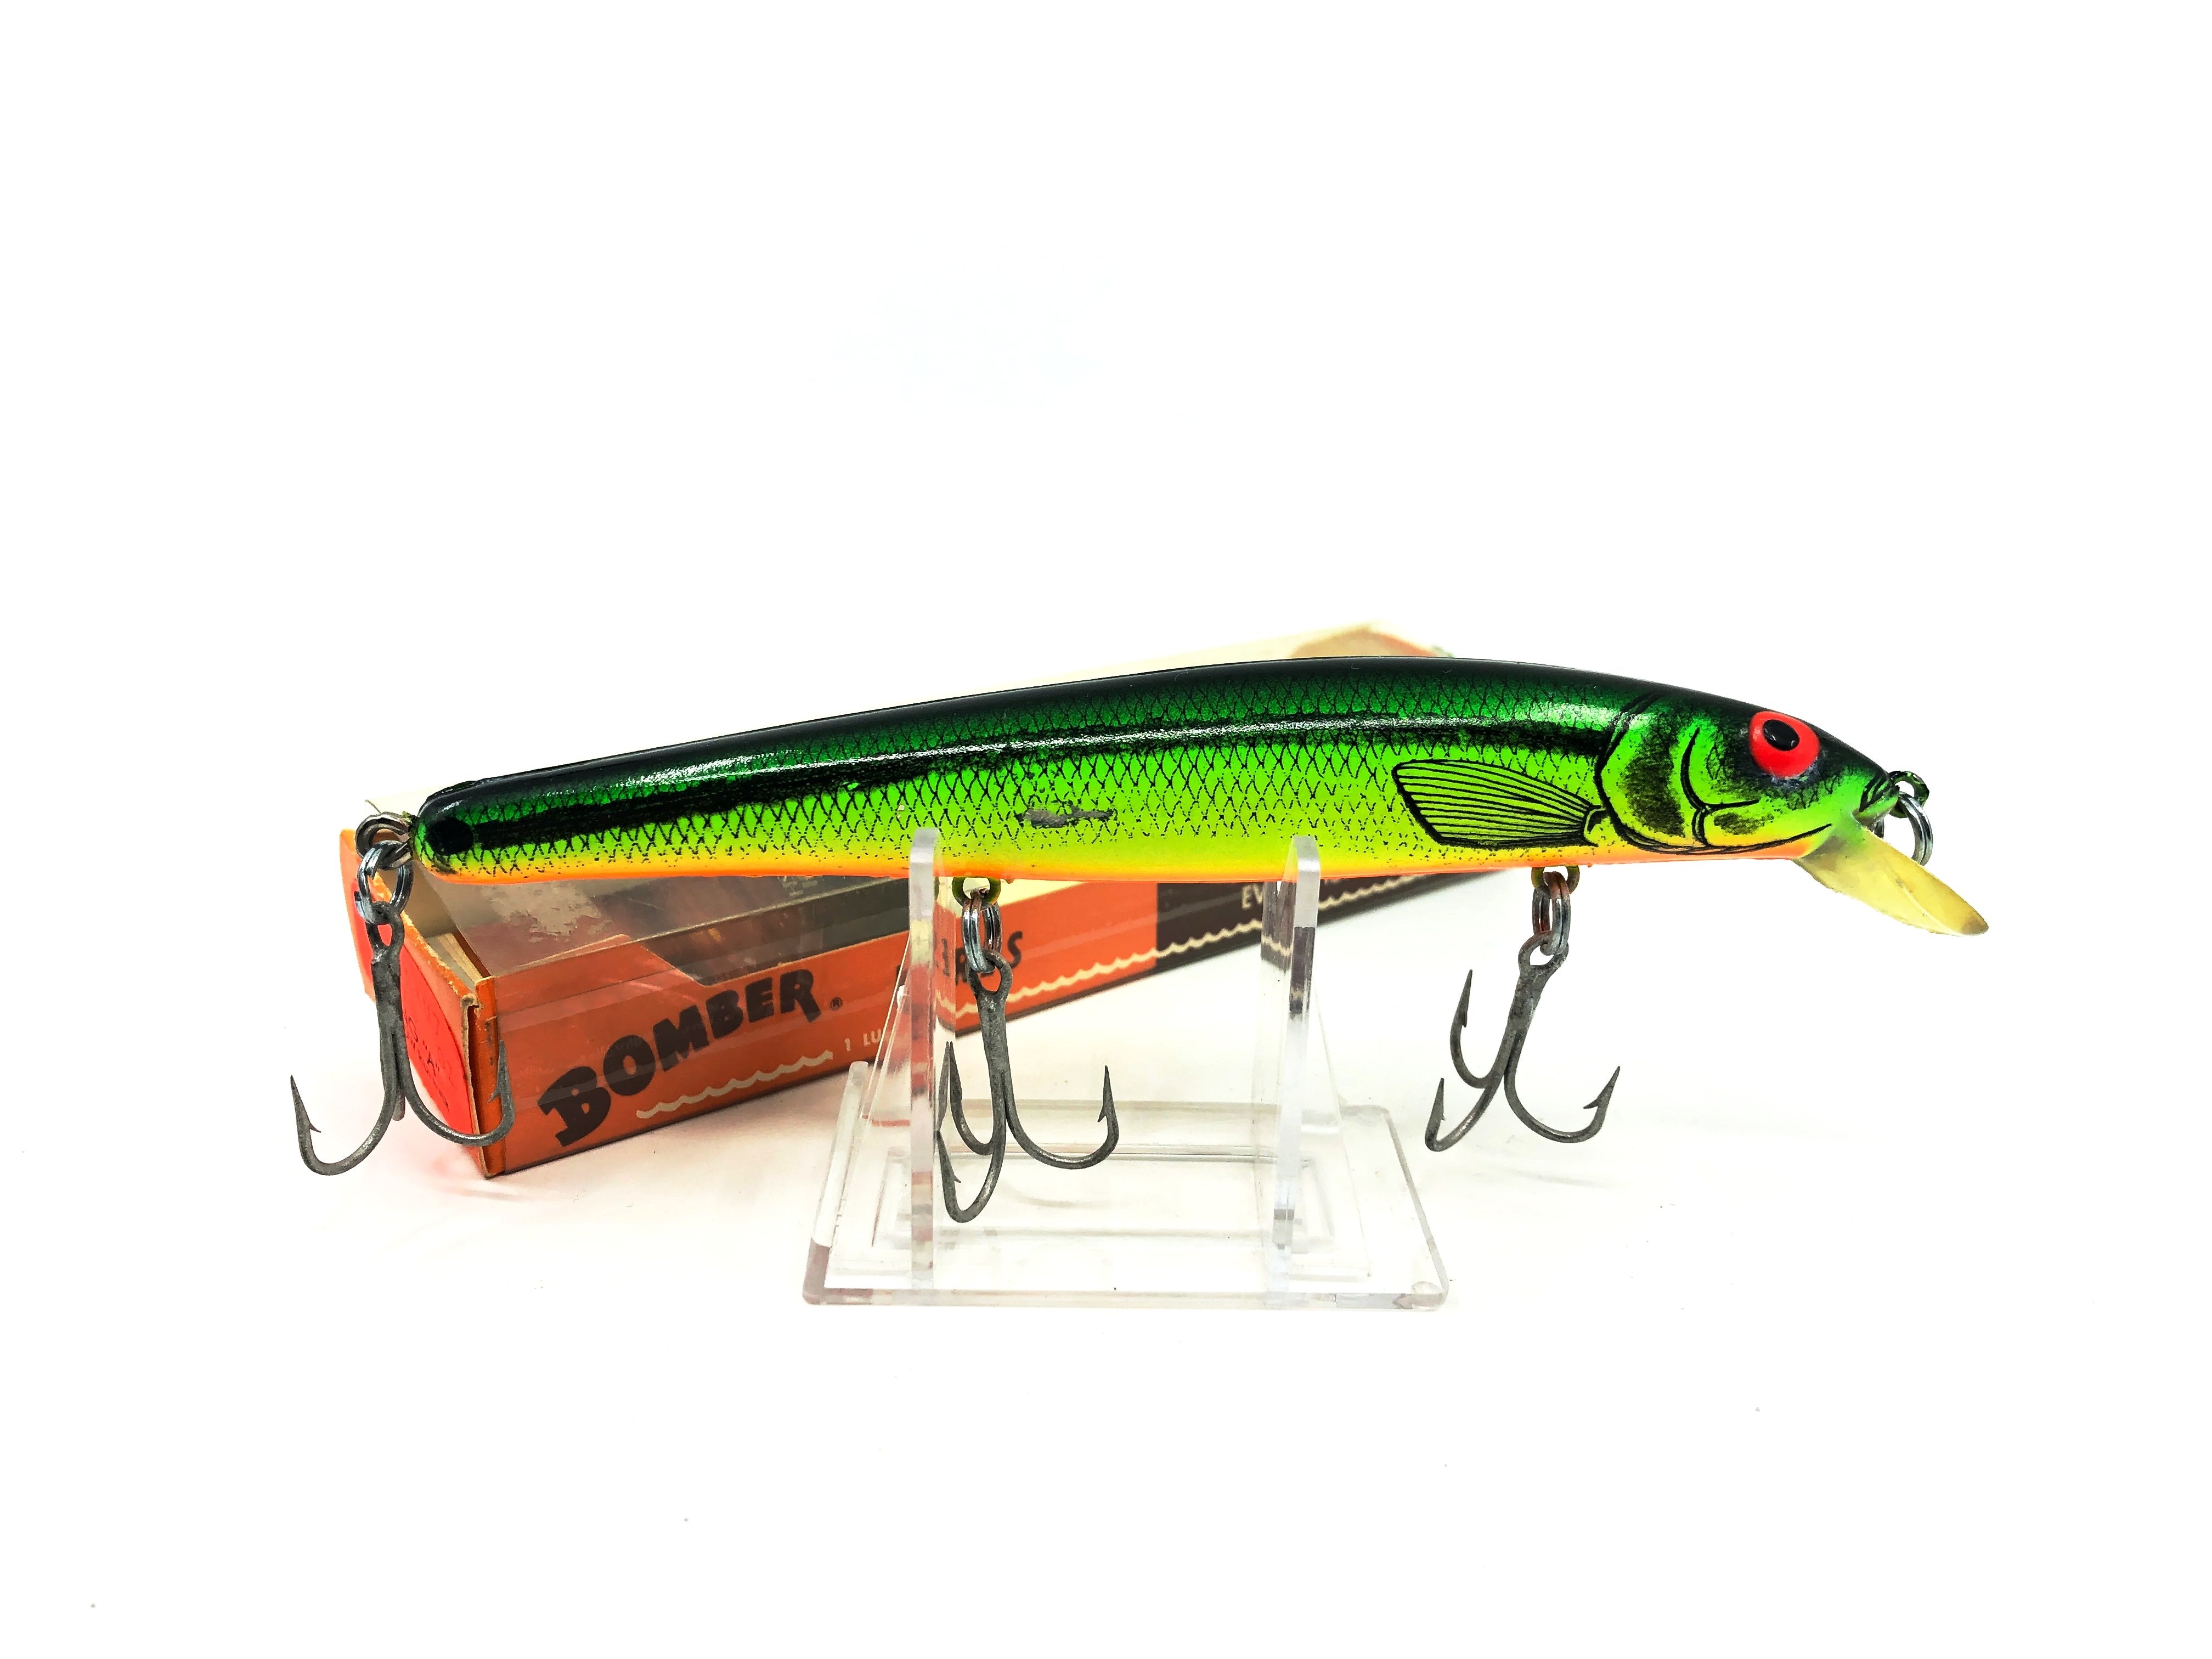 Bomber Long A - 16A, XM7 Fire River Minnow/Orange Belly Color – My